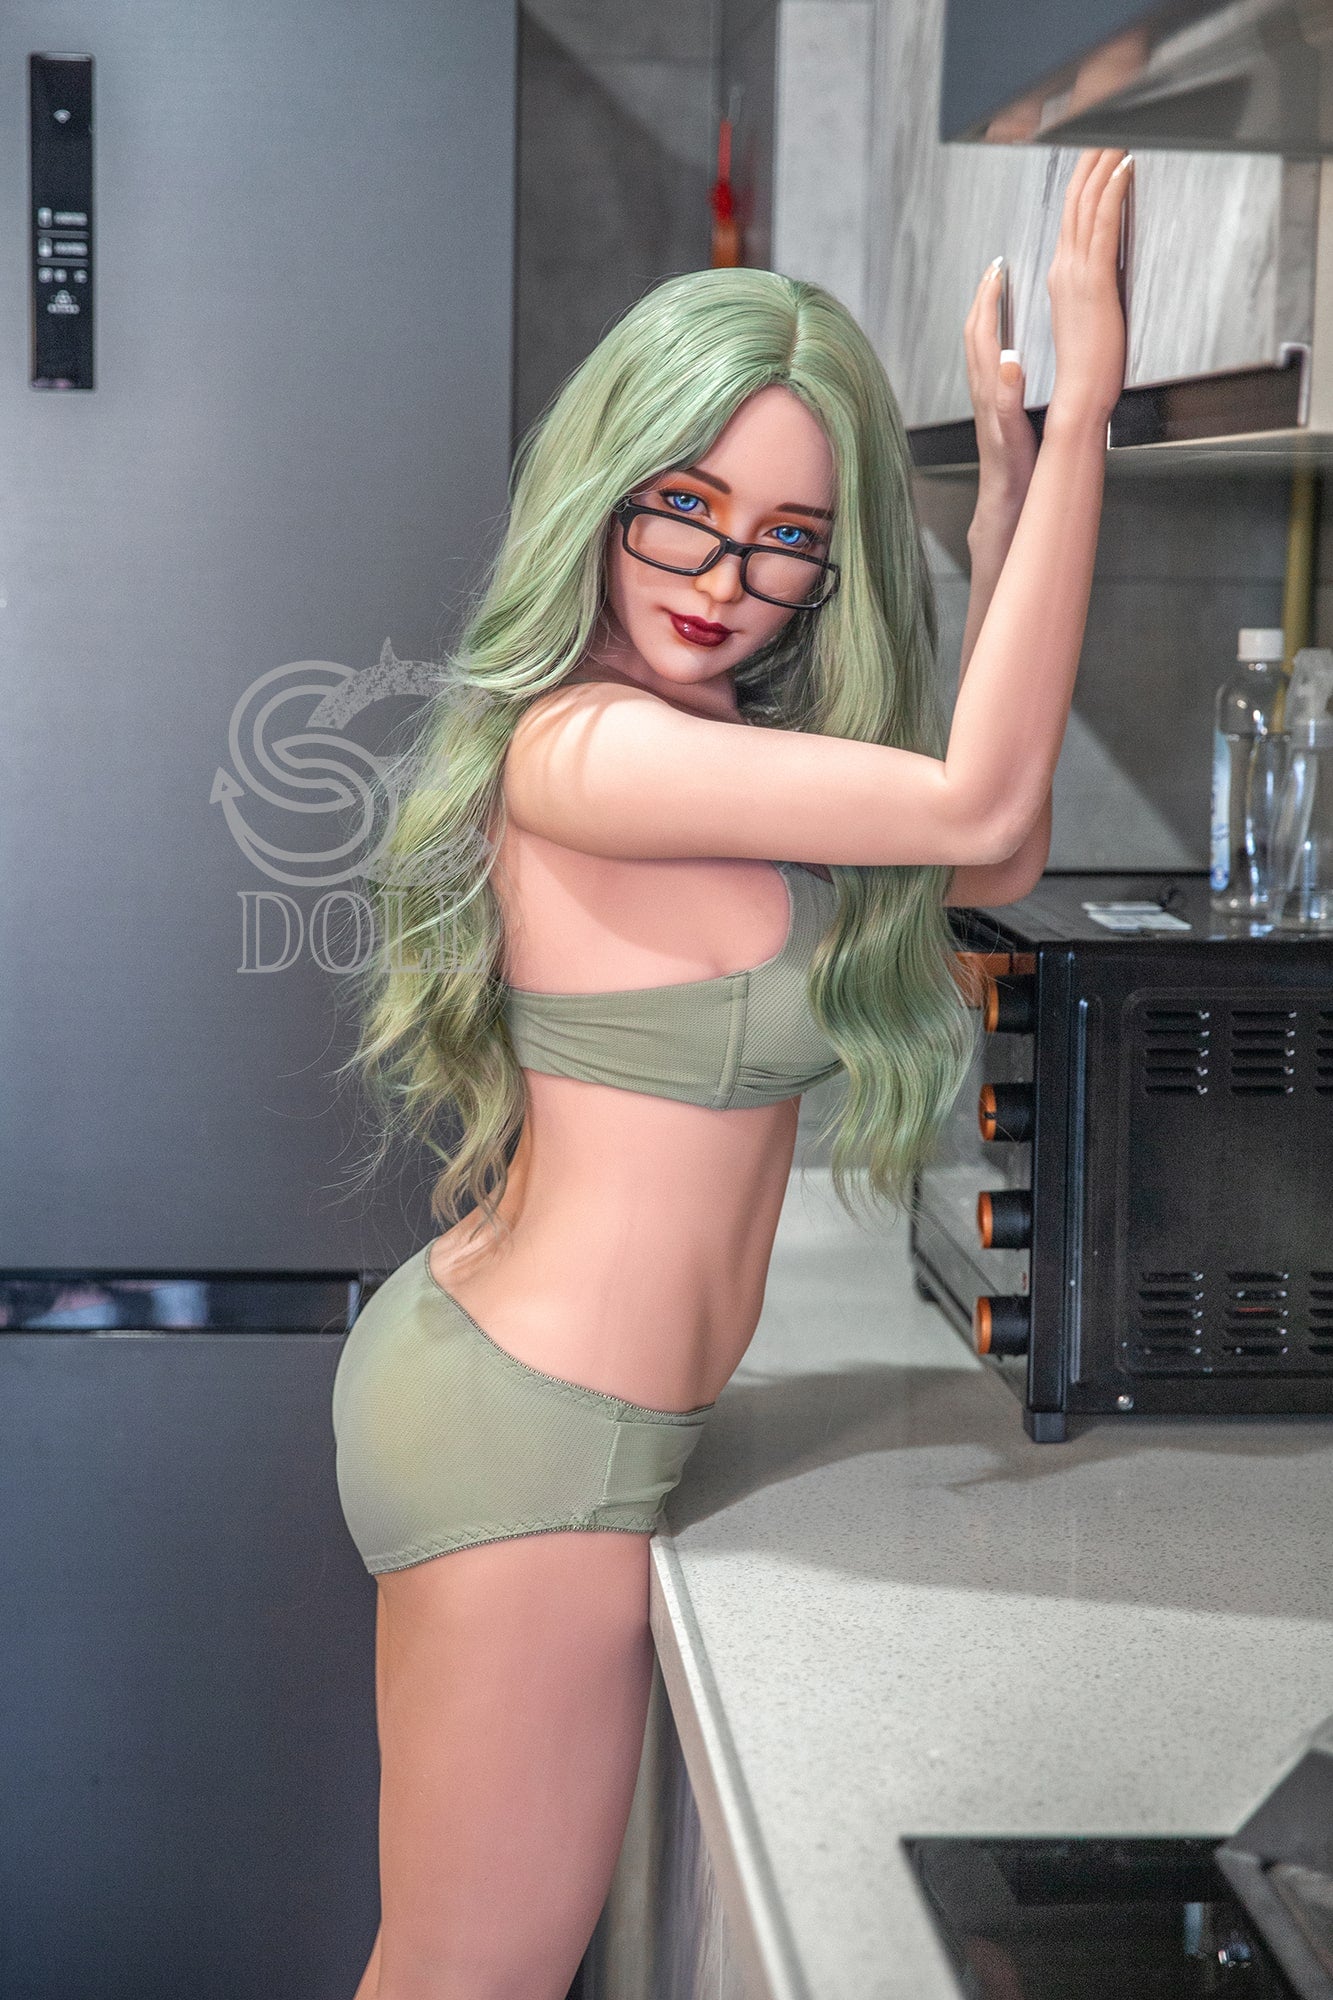 Sweet and innocent 163cm sex doll with glasses